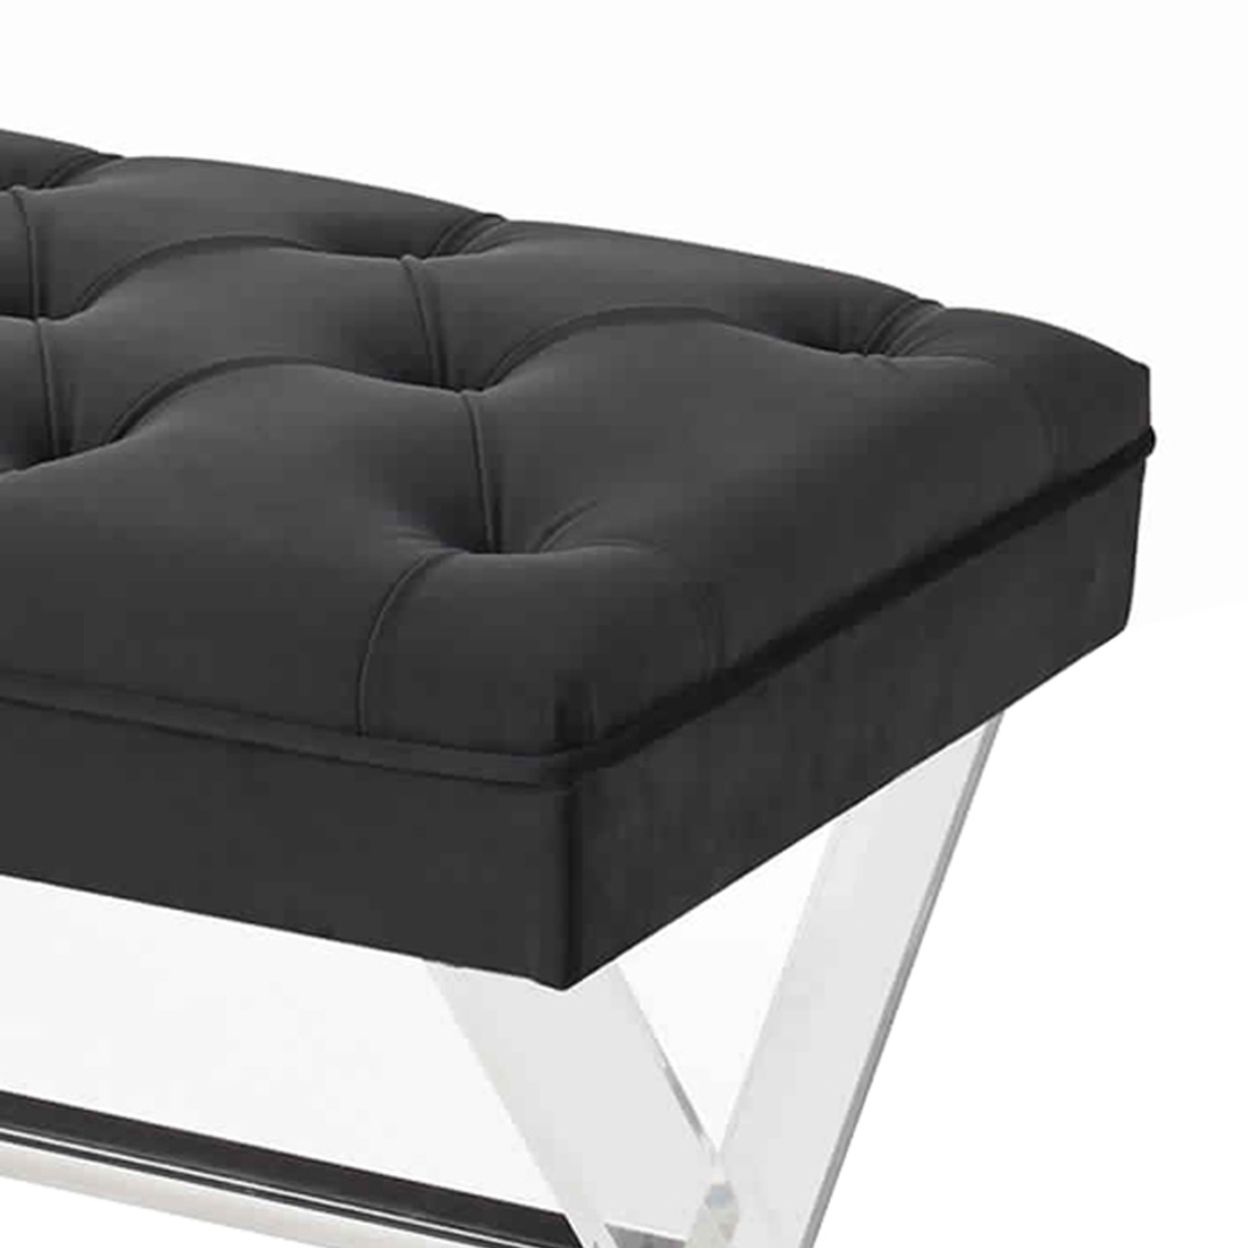 Trendy Black Fabric Ottomans With Fringe Trim For Buy Button Tufted Fabric Ottoman Bench With X Shaped Acrylic Legs (View 4 of 10)